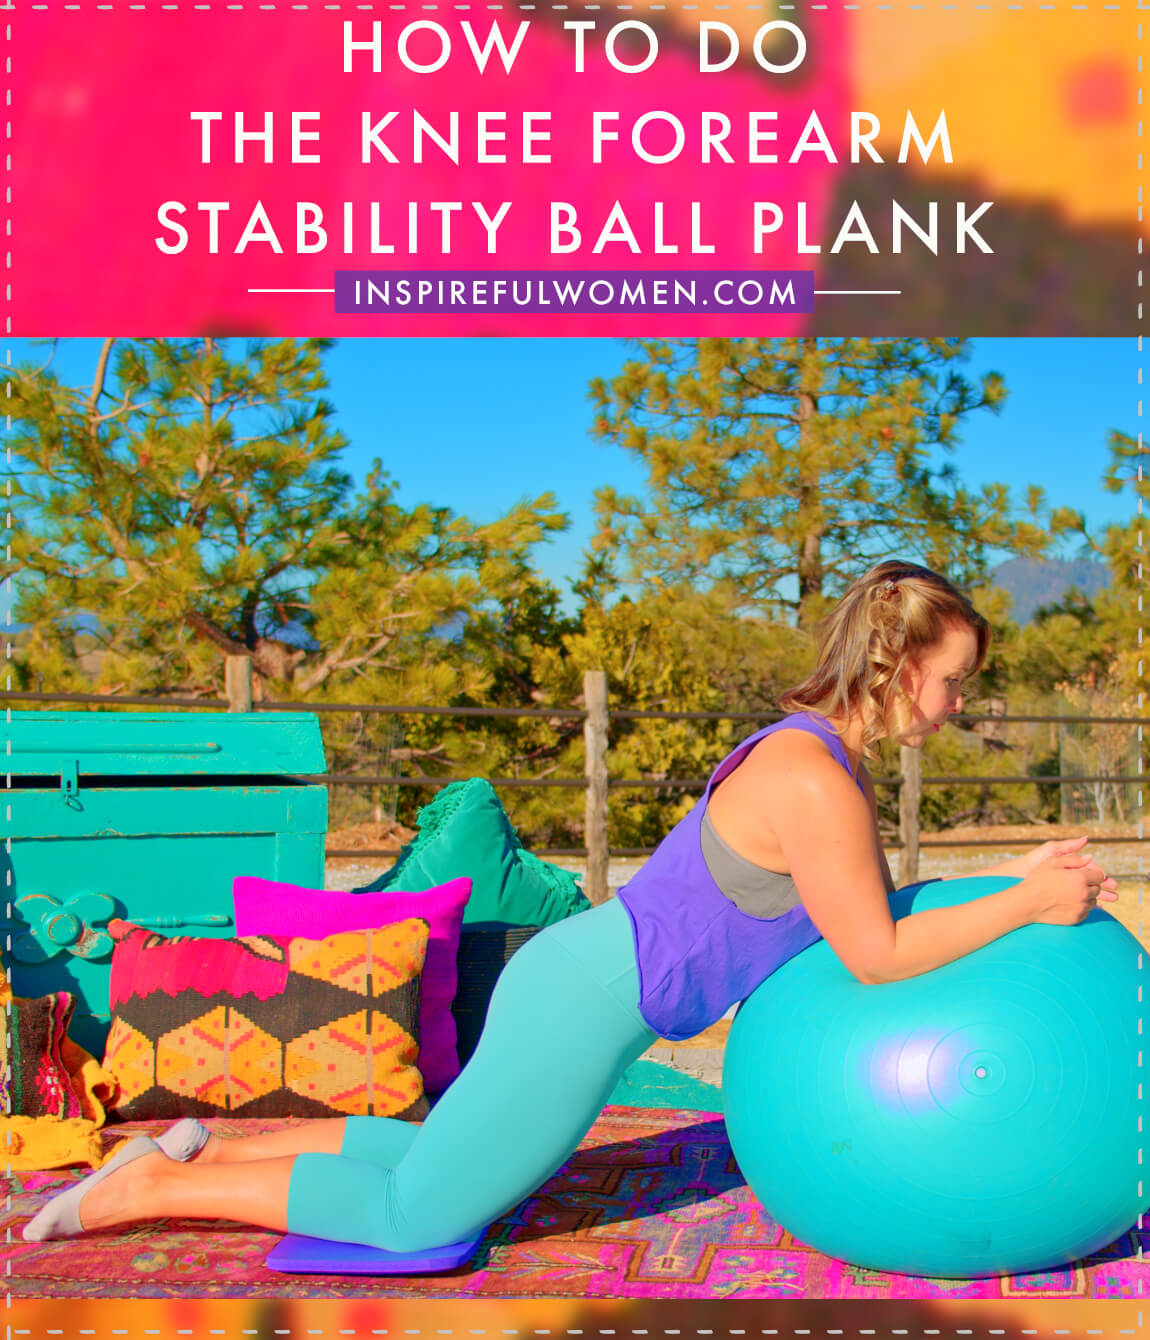 how-to-knee-forearm-stability-ball-plank-neutral-spine-core-abs-exercise-at-home-proper-form